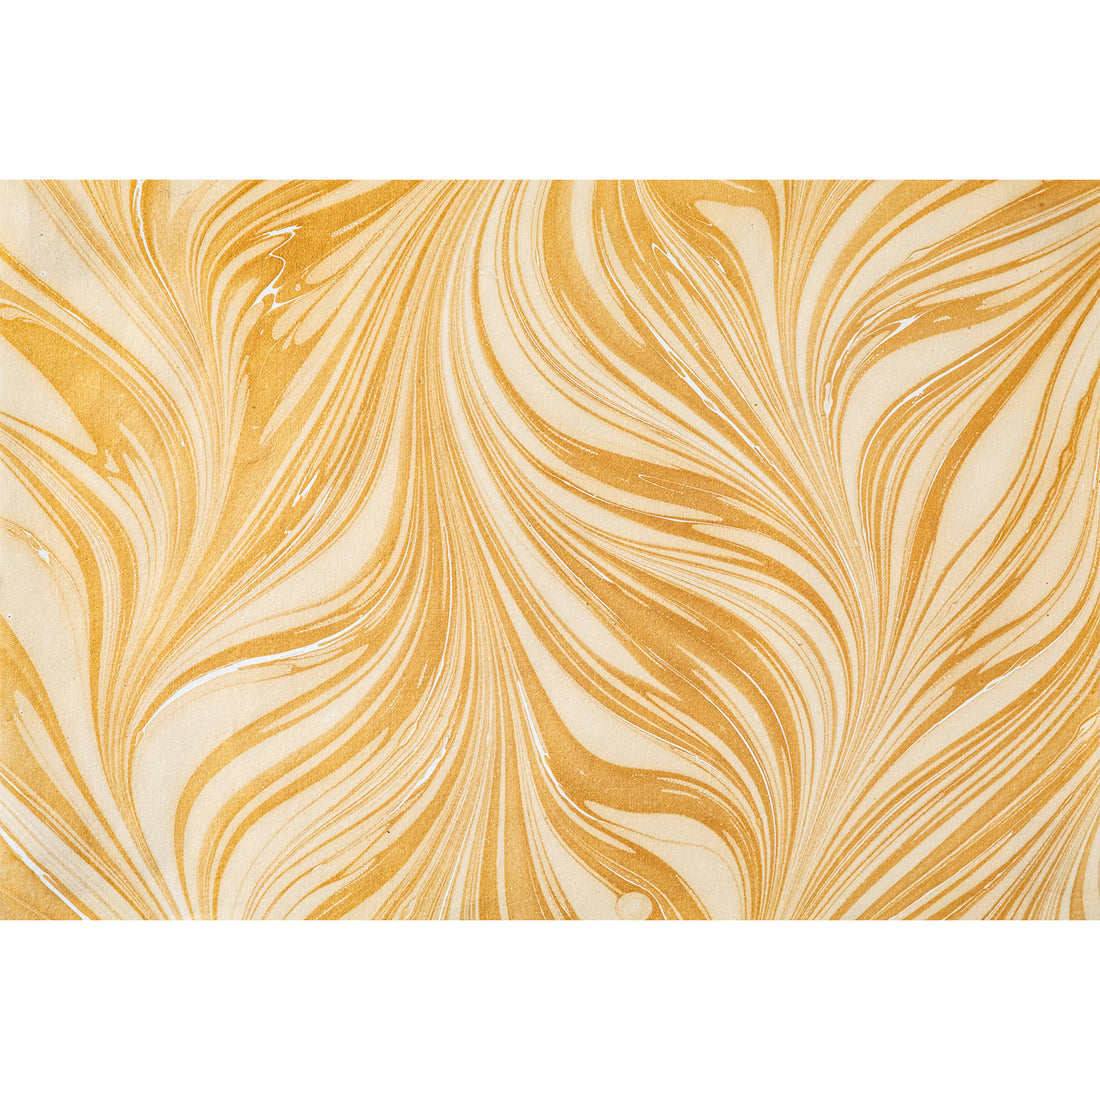 An abstract, marbled pattern of gold swirled with white in alternating up and down sweeps. 